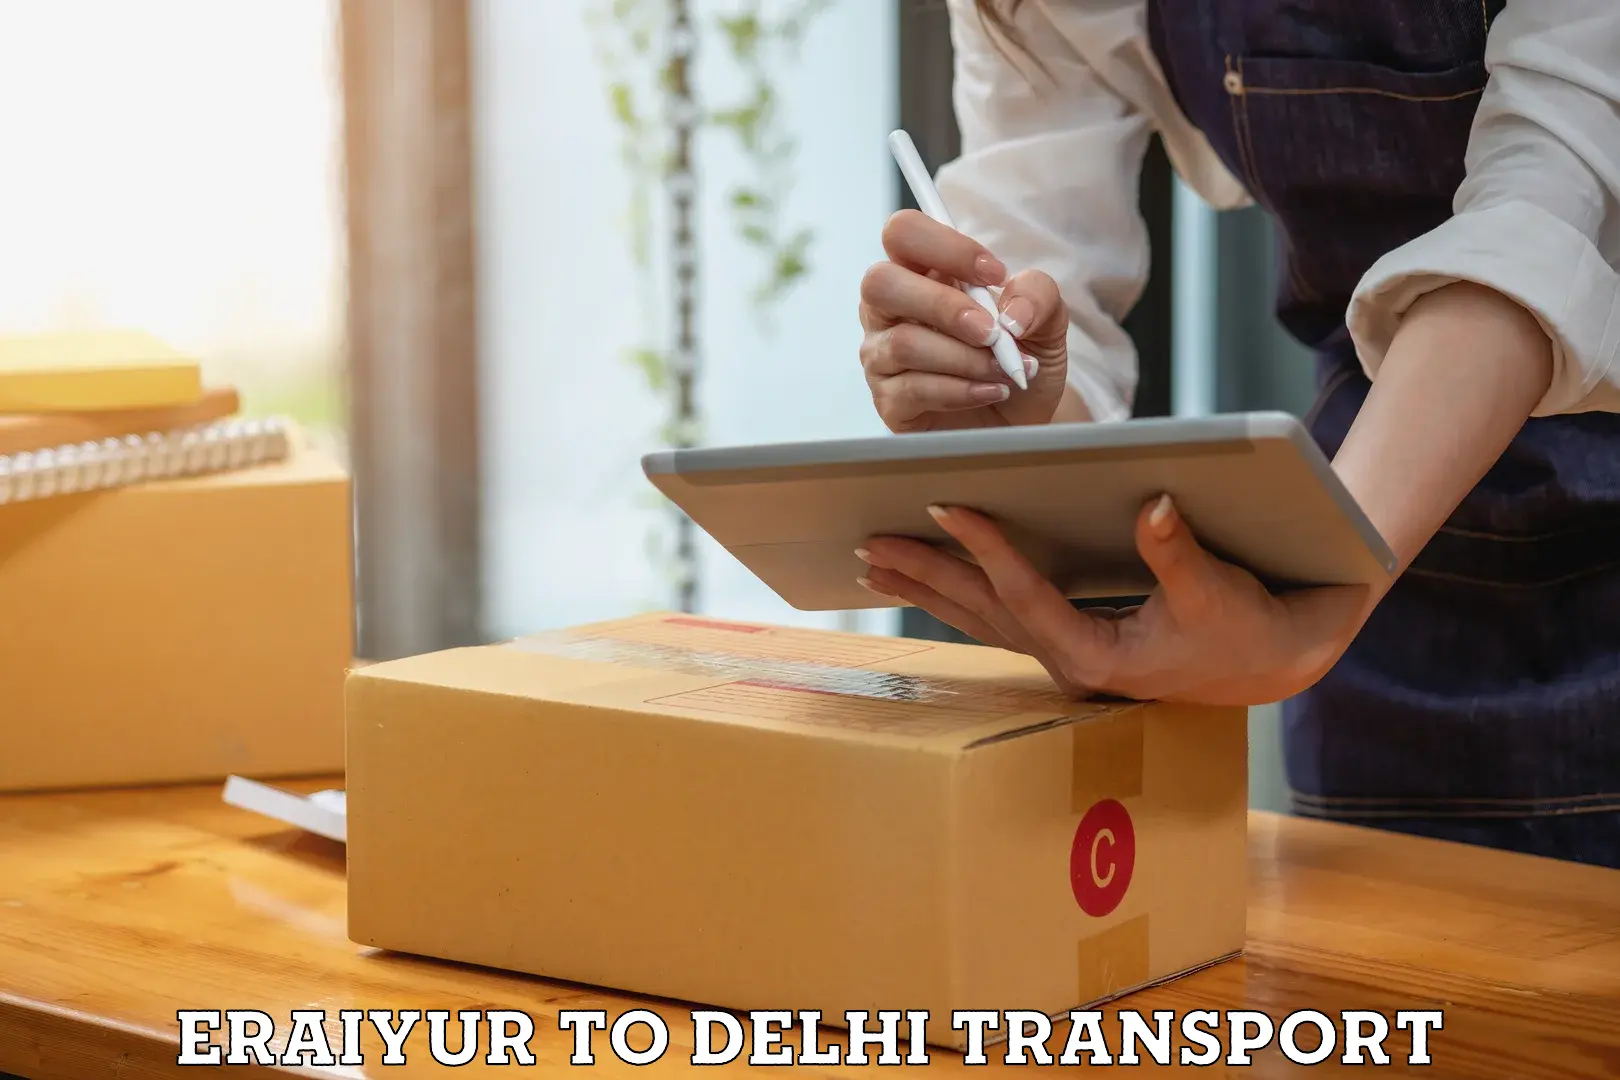 Transport shared services in Eraiyur to East Delhi